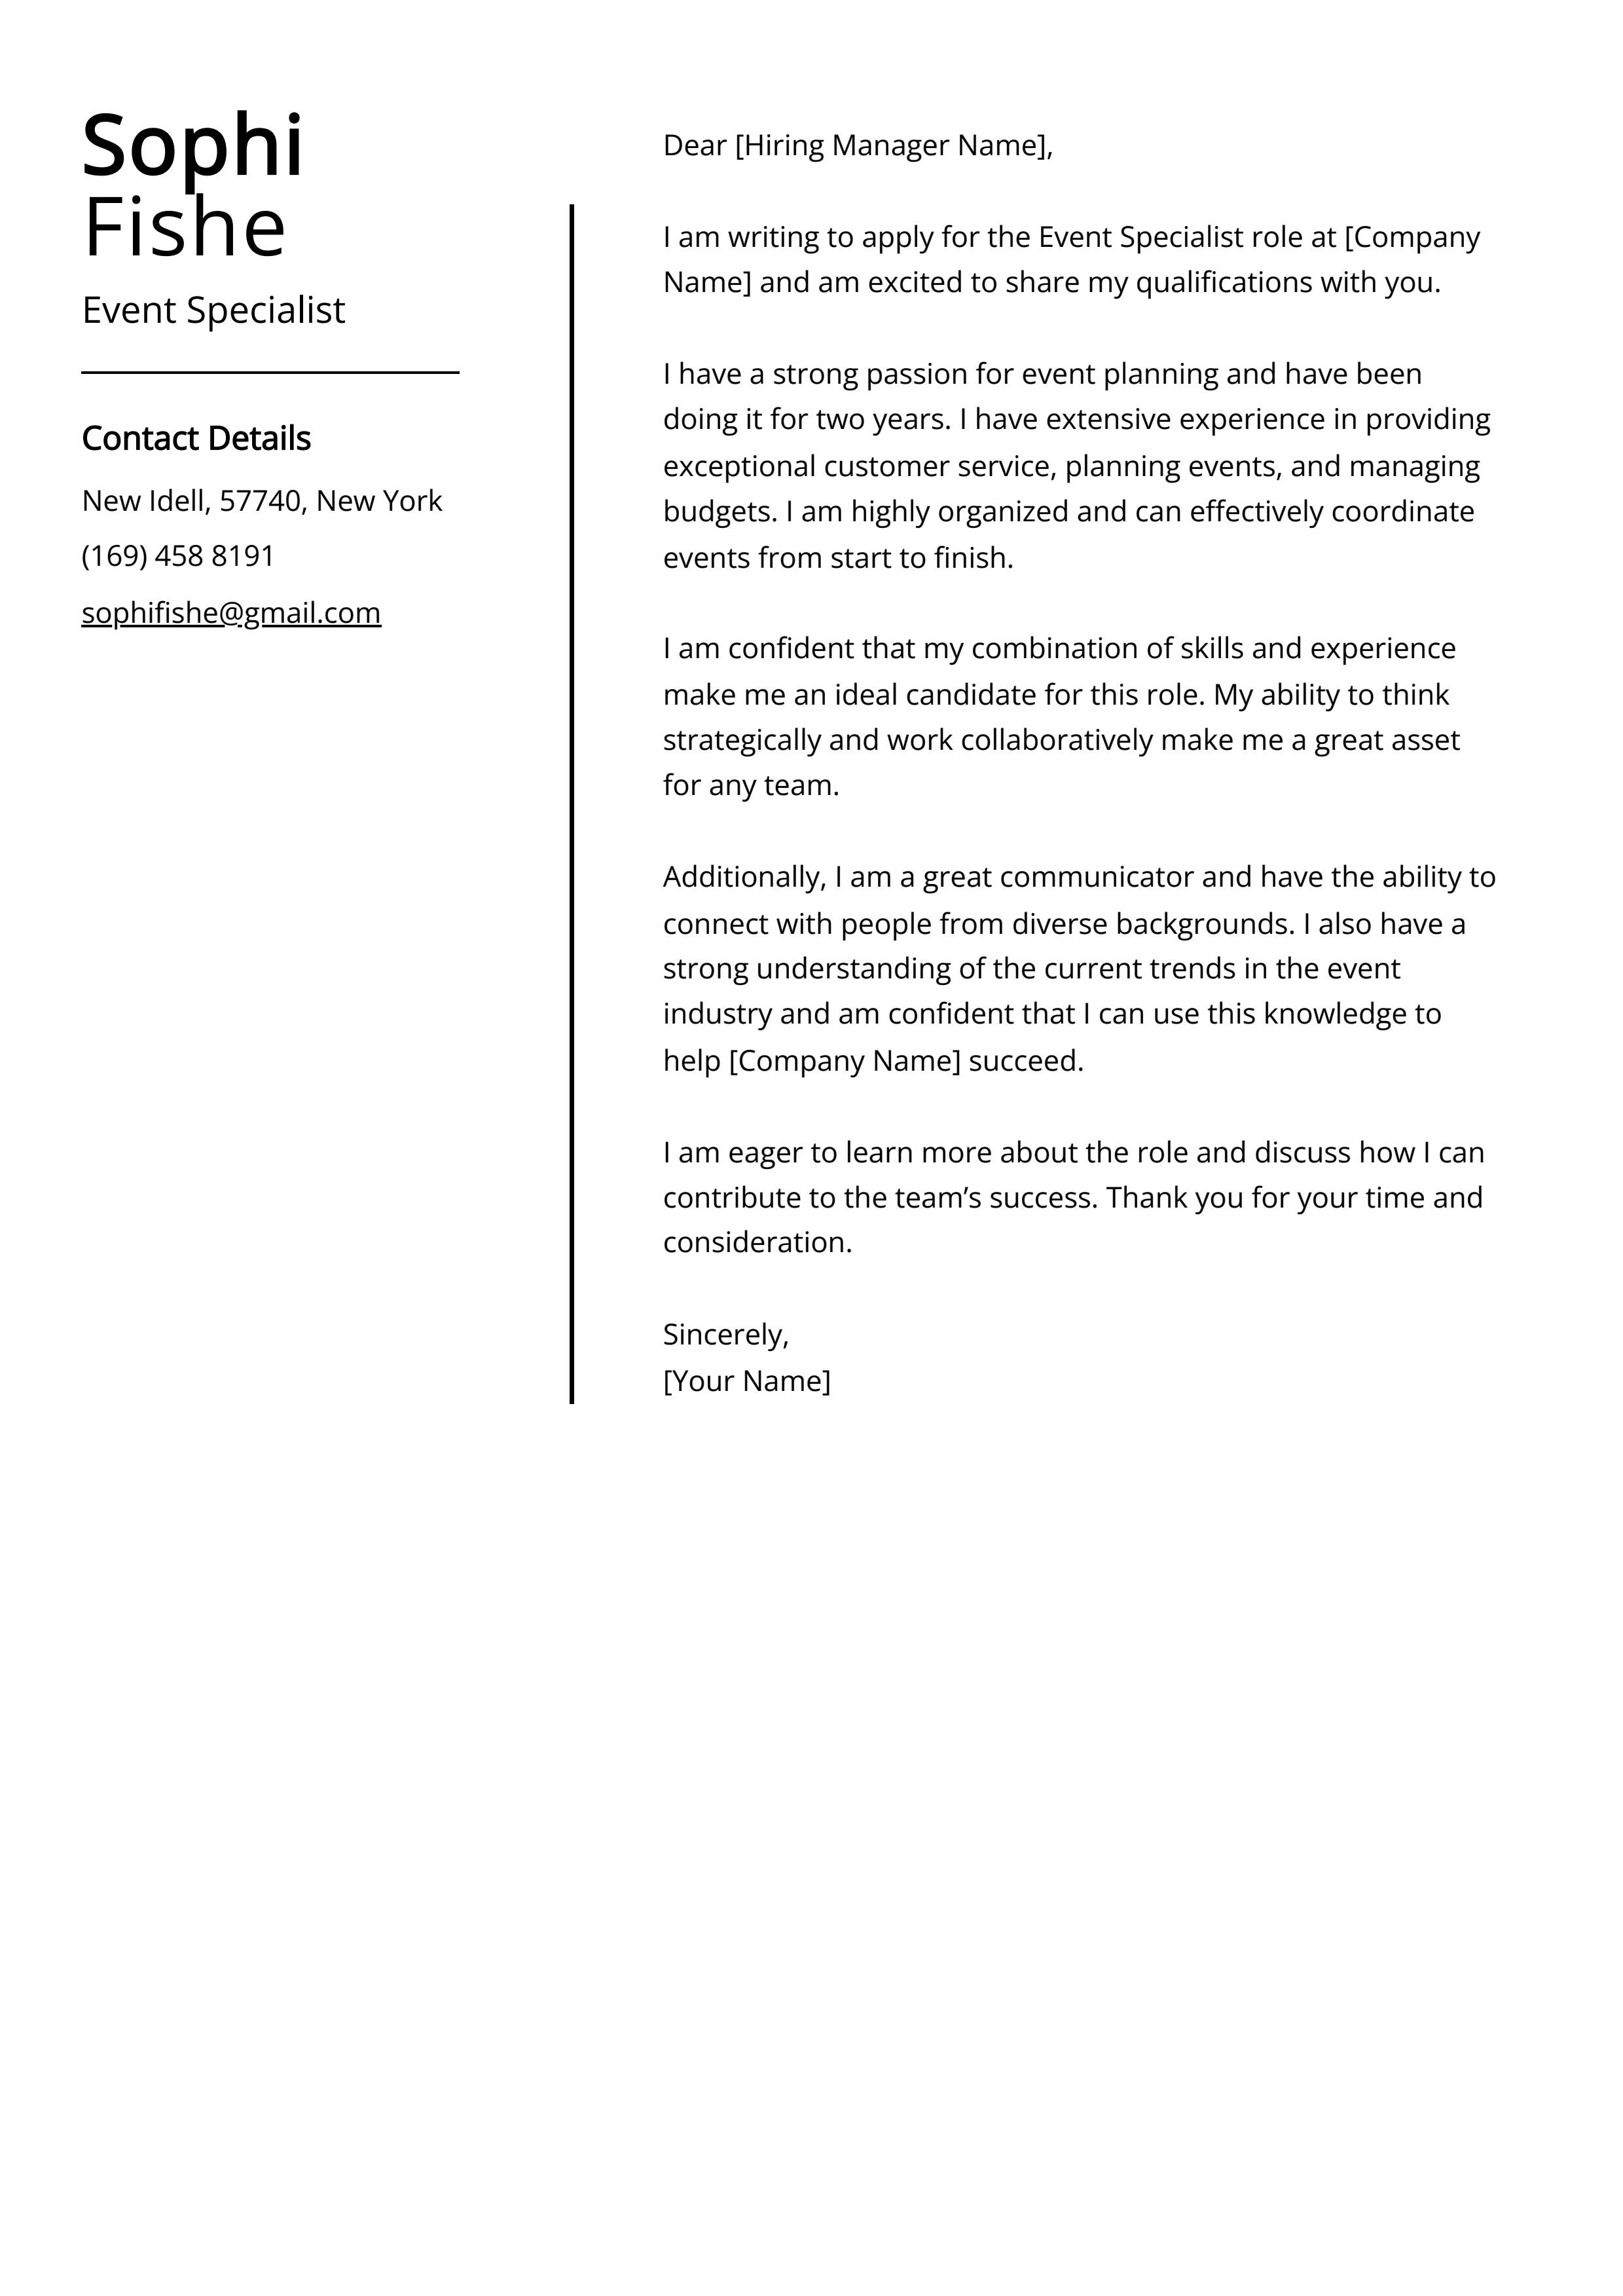 Event Specialist Cover Letter Example